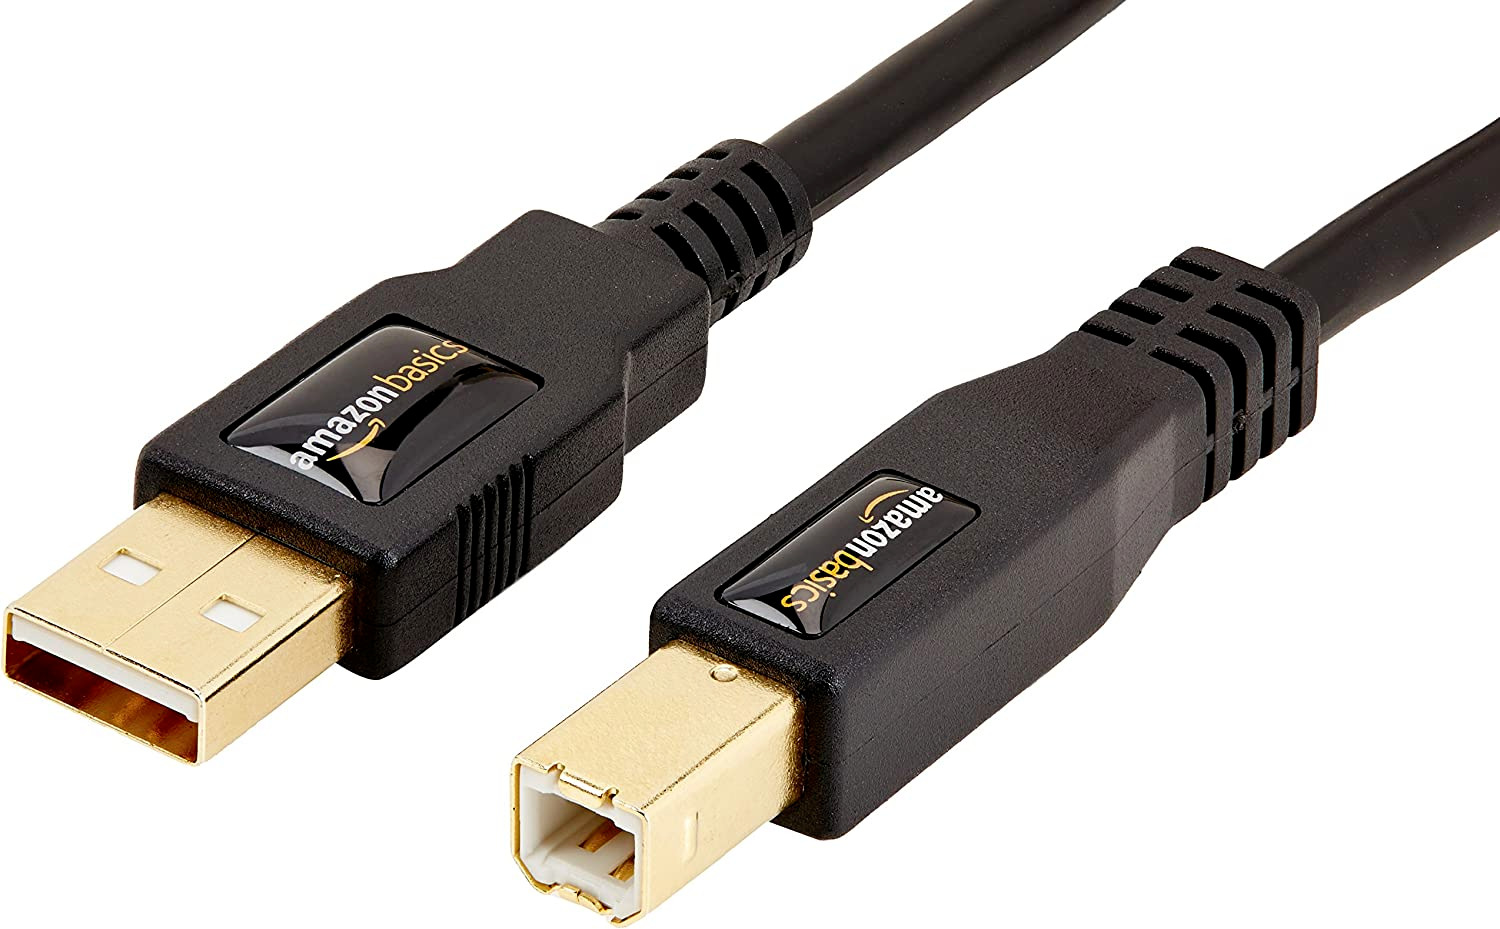 AmazonBasics PC045 16ft USB 2.0 Male to Male Cable